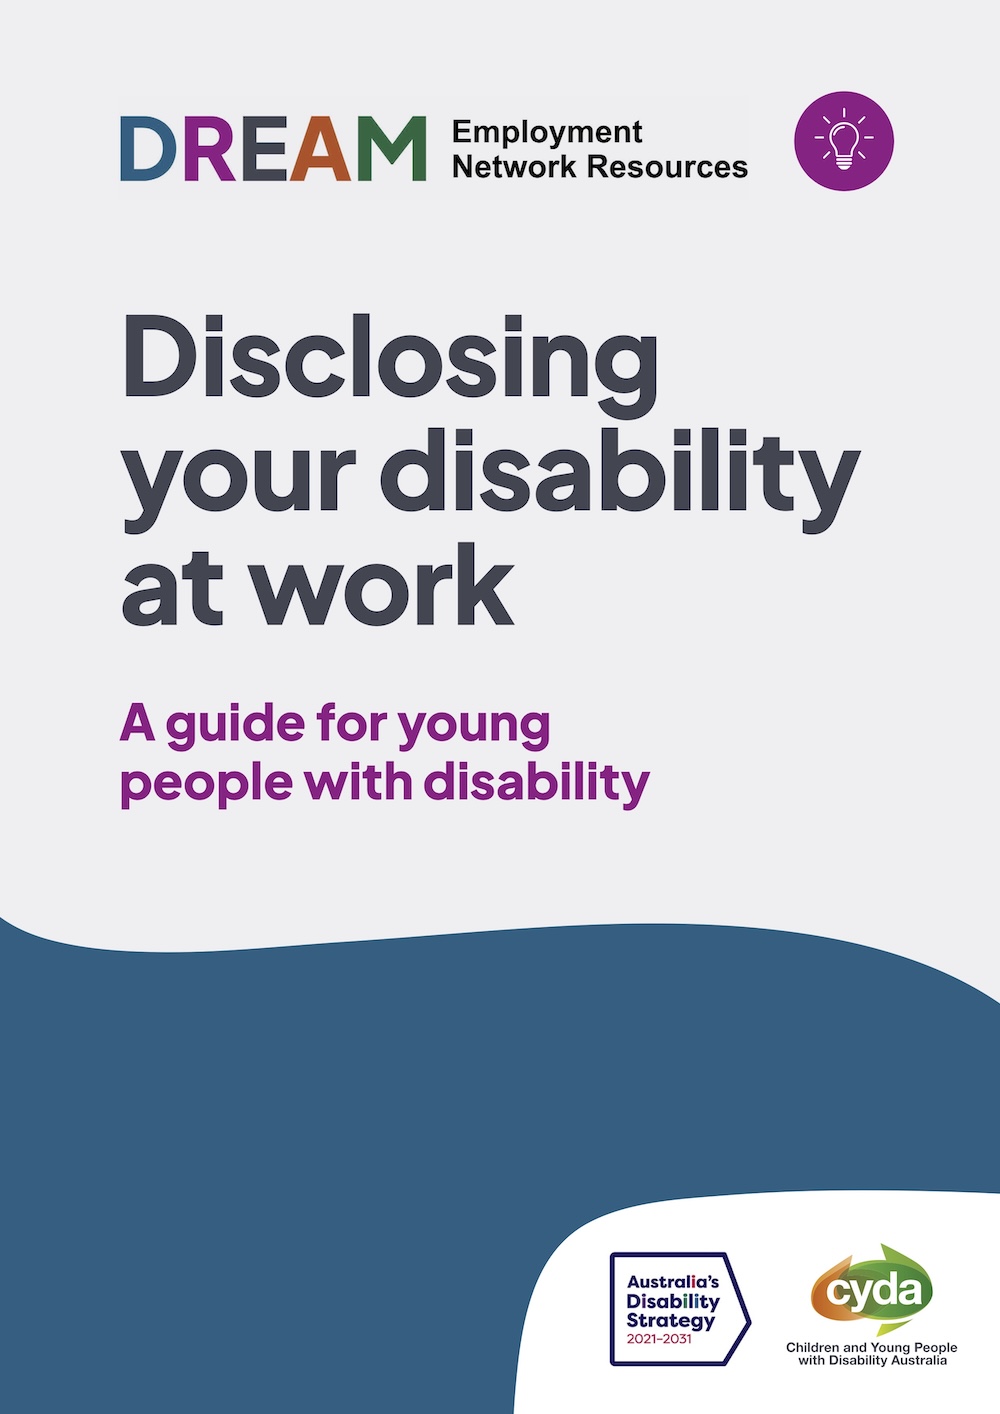 PDF Cover titled "Disclosing your disability at work, a guide for young people with disability" with the logo for the DREAM Employment Network with a purple lightbulb graphic up the top, and the logos for the Australian Disability Strategy and CYDA down the bottom.